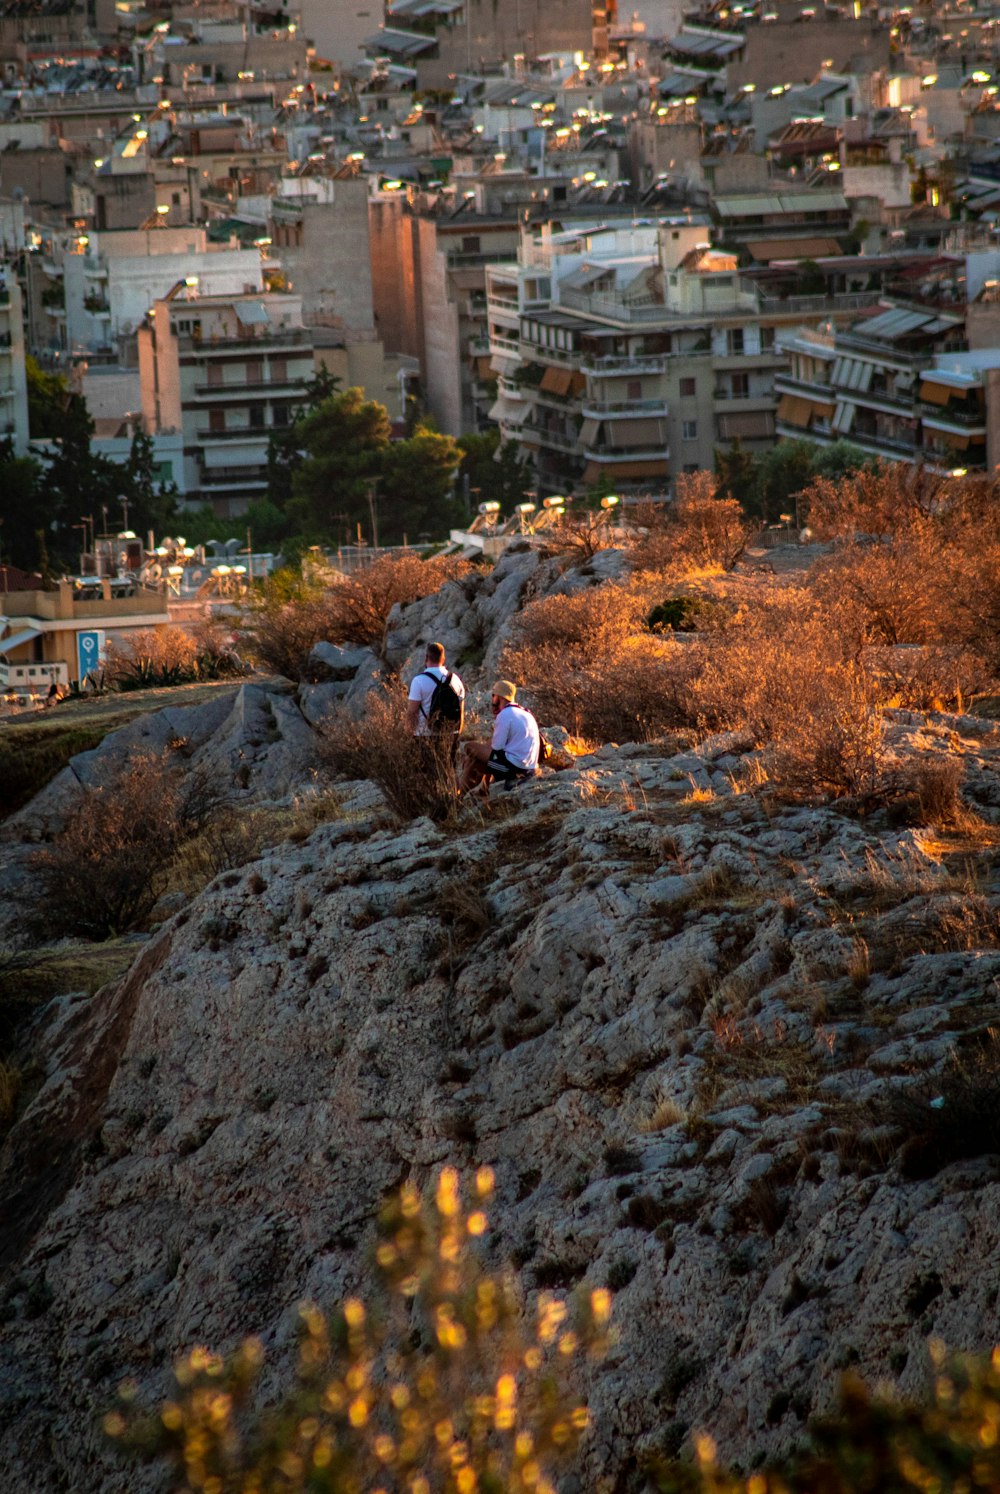 a group of people on a rocky hill with buildings in the background